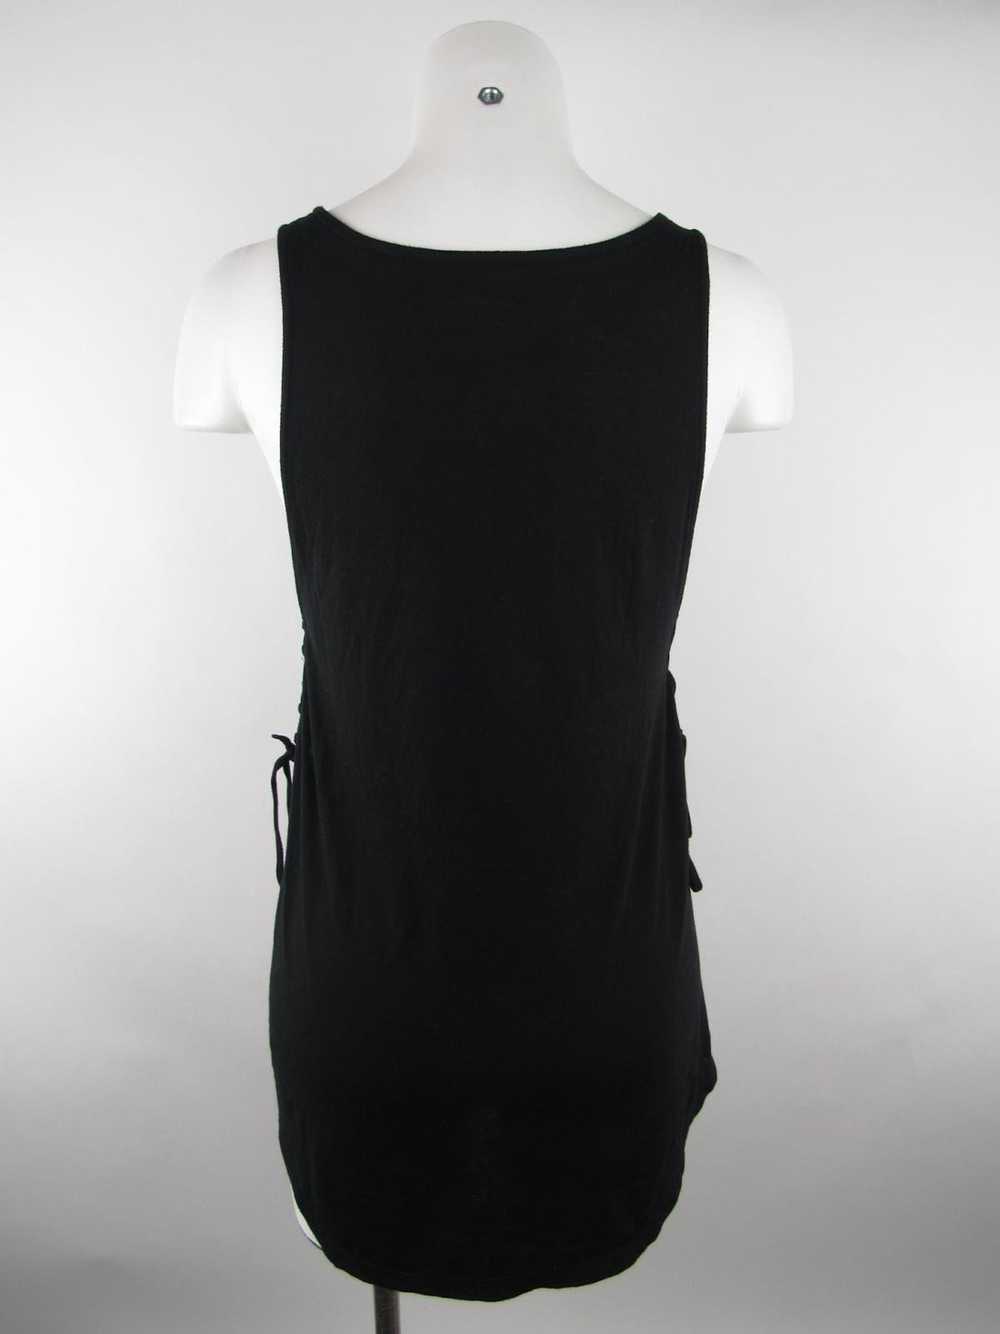 Mossimo Scoop Neck Tunic Top - image 2